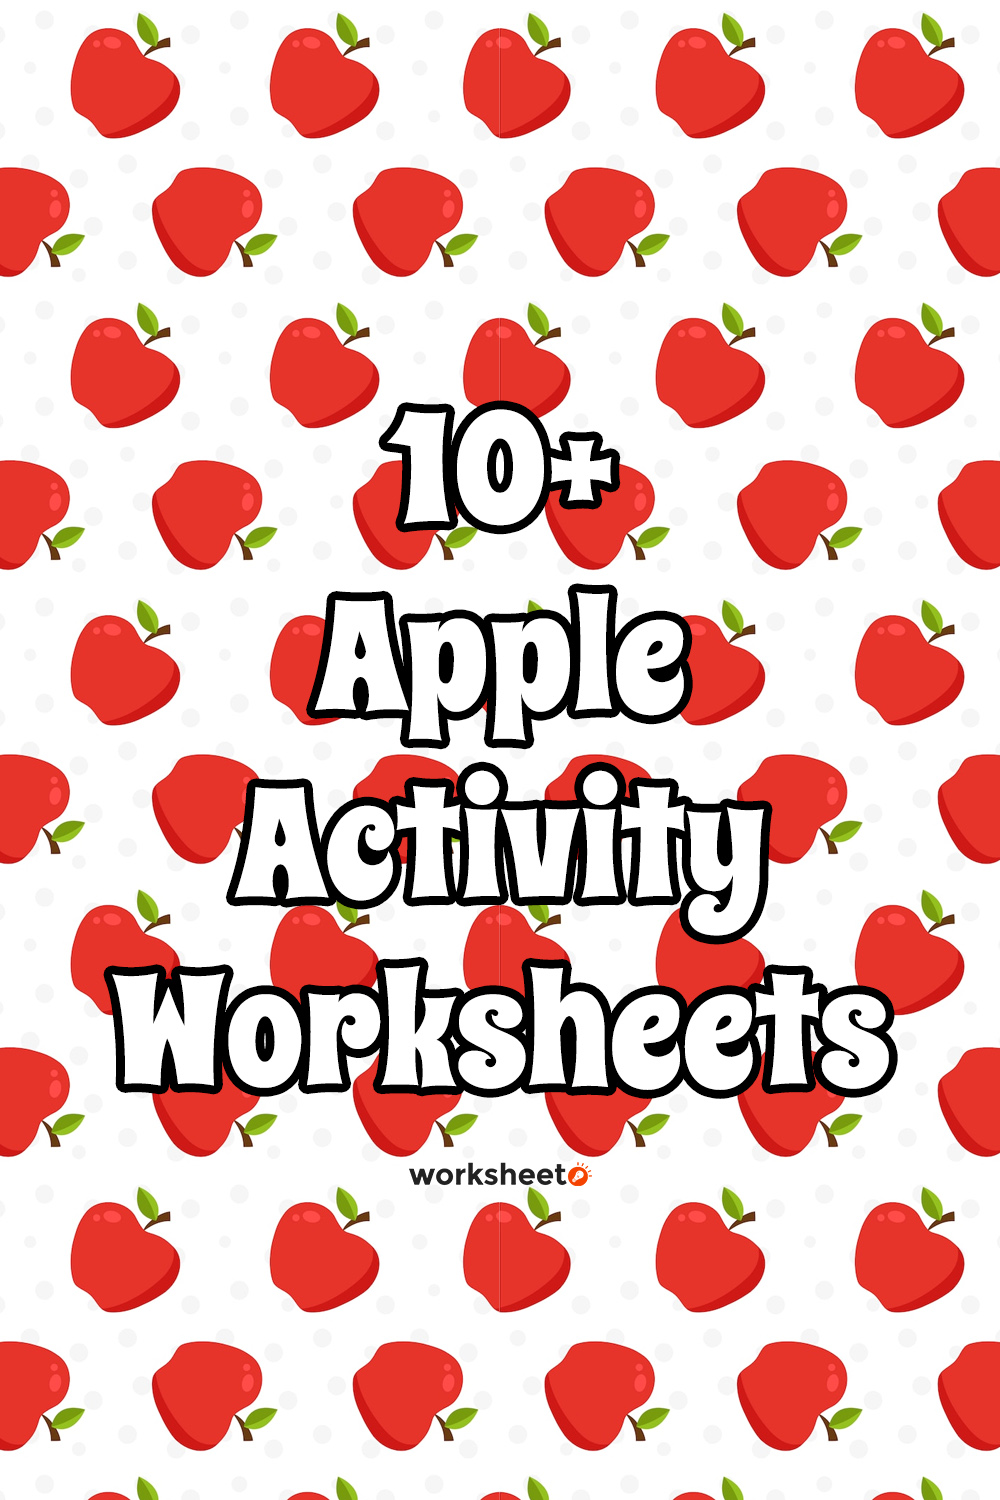 Apple Activity Worksheets